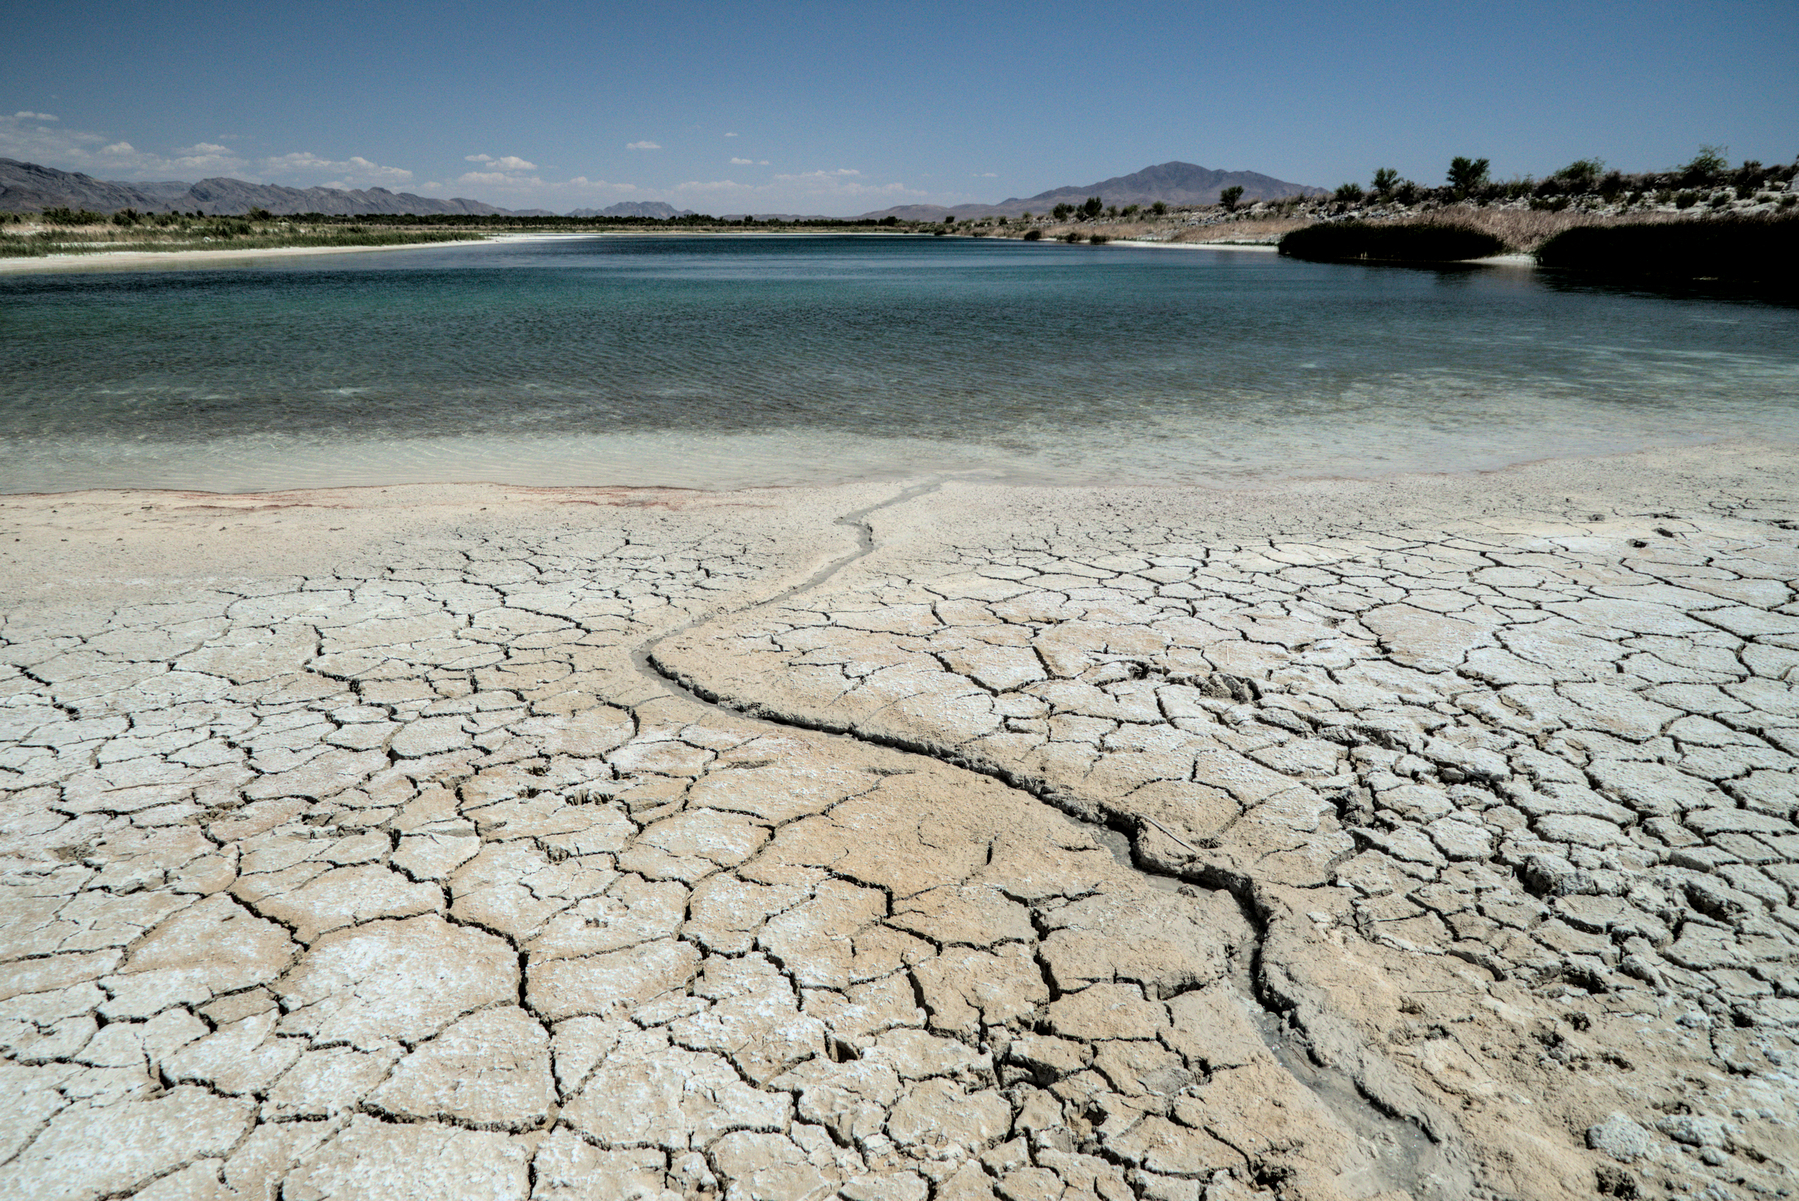 Parched and cracked desert mud forms a beach at the edge of a green reservoir in the desert.